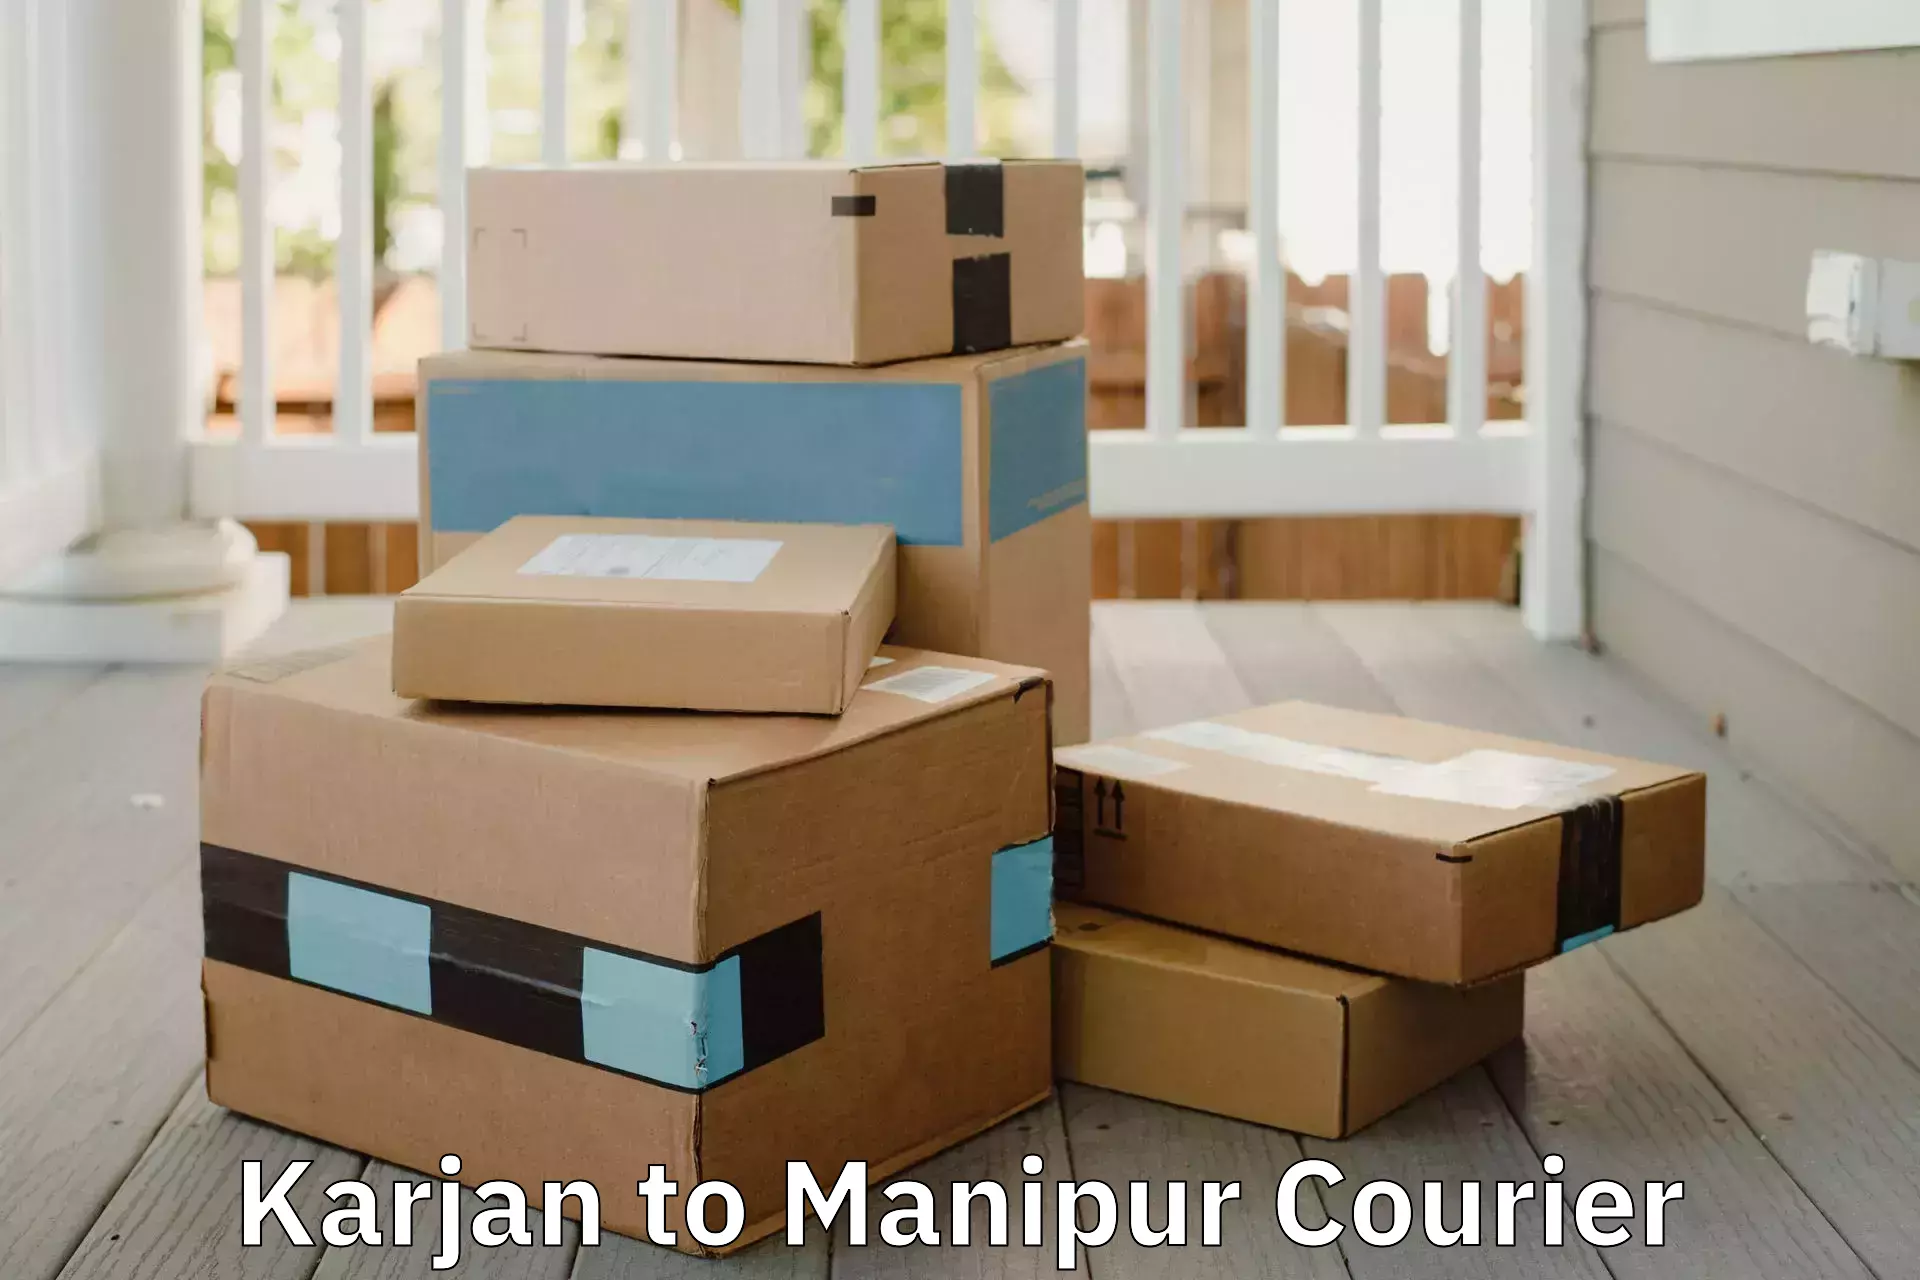 Trusted moving company Karjan to Manipur